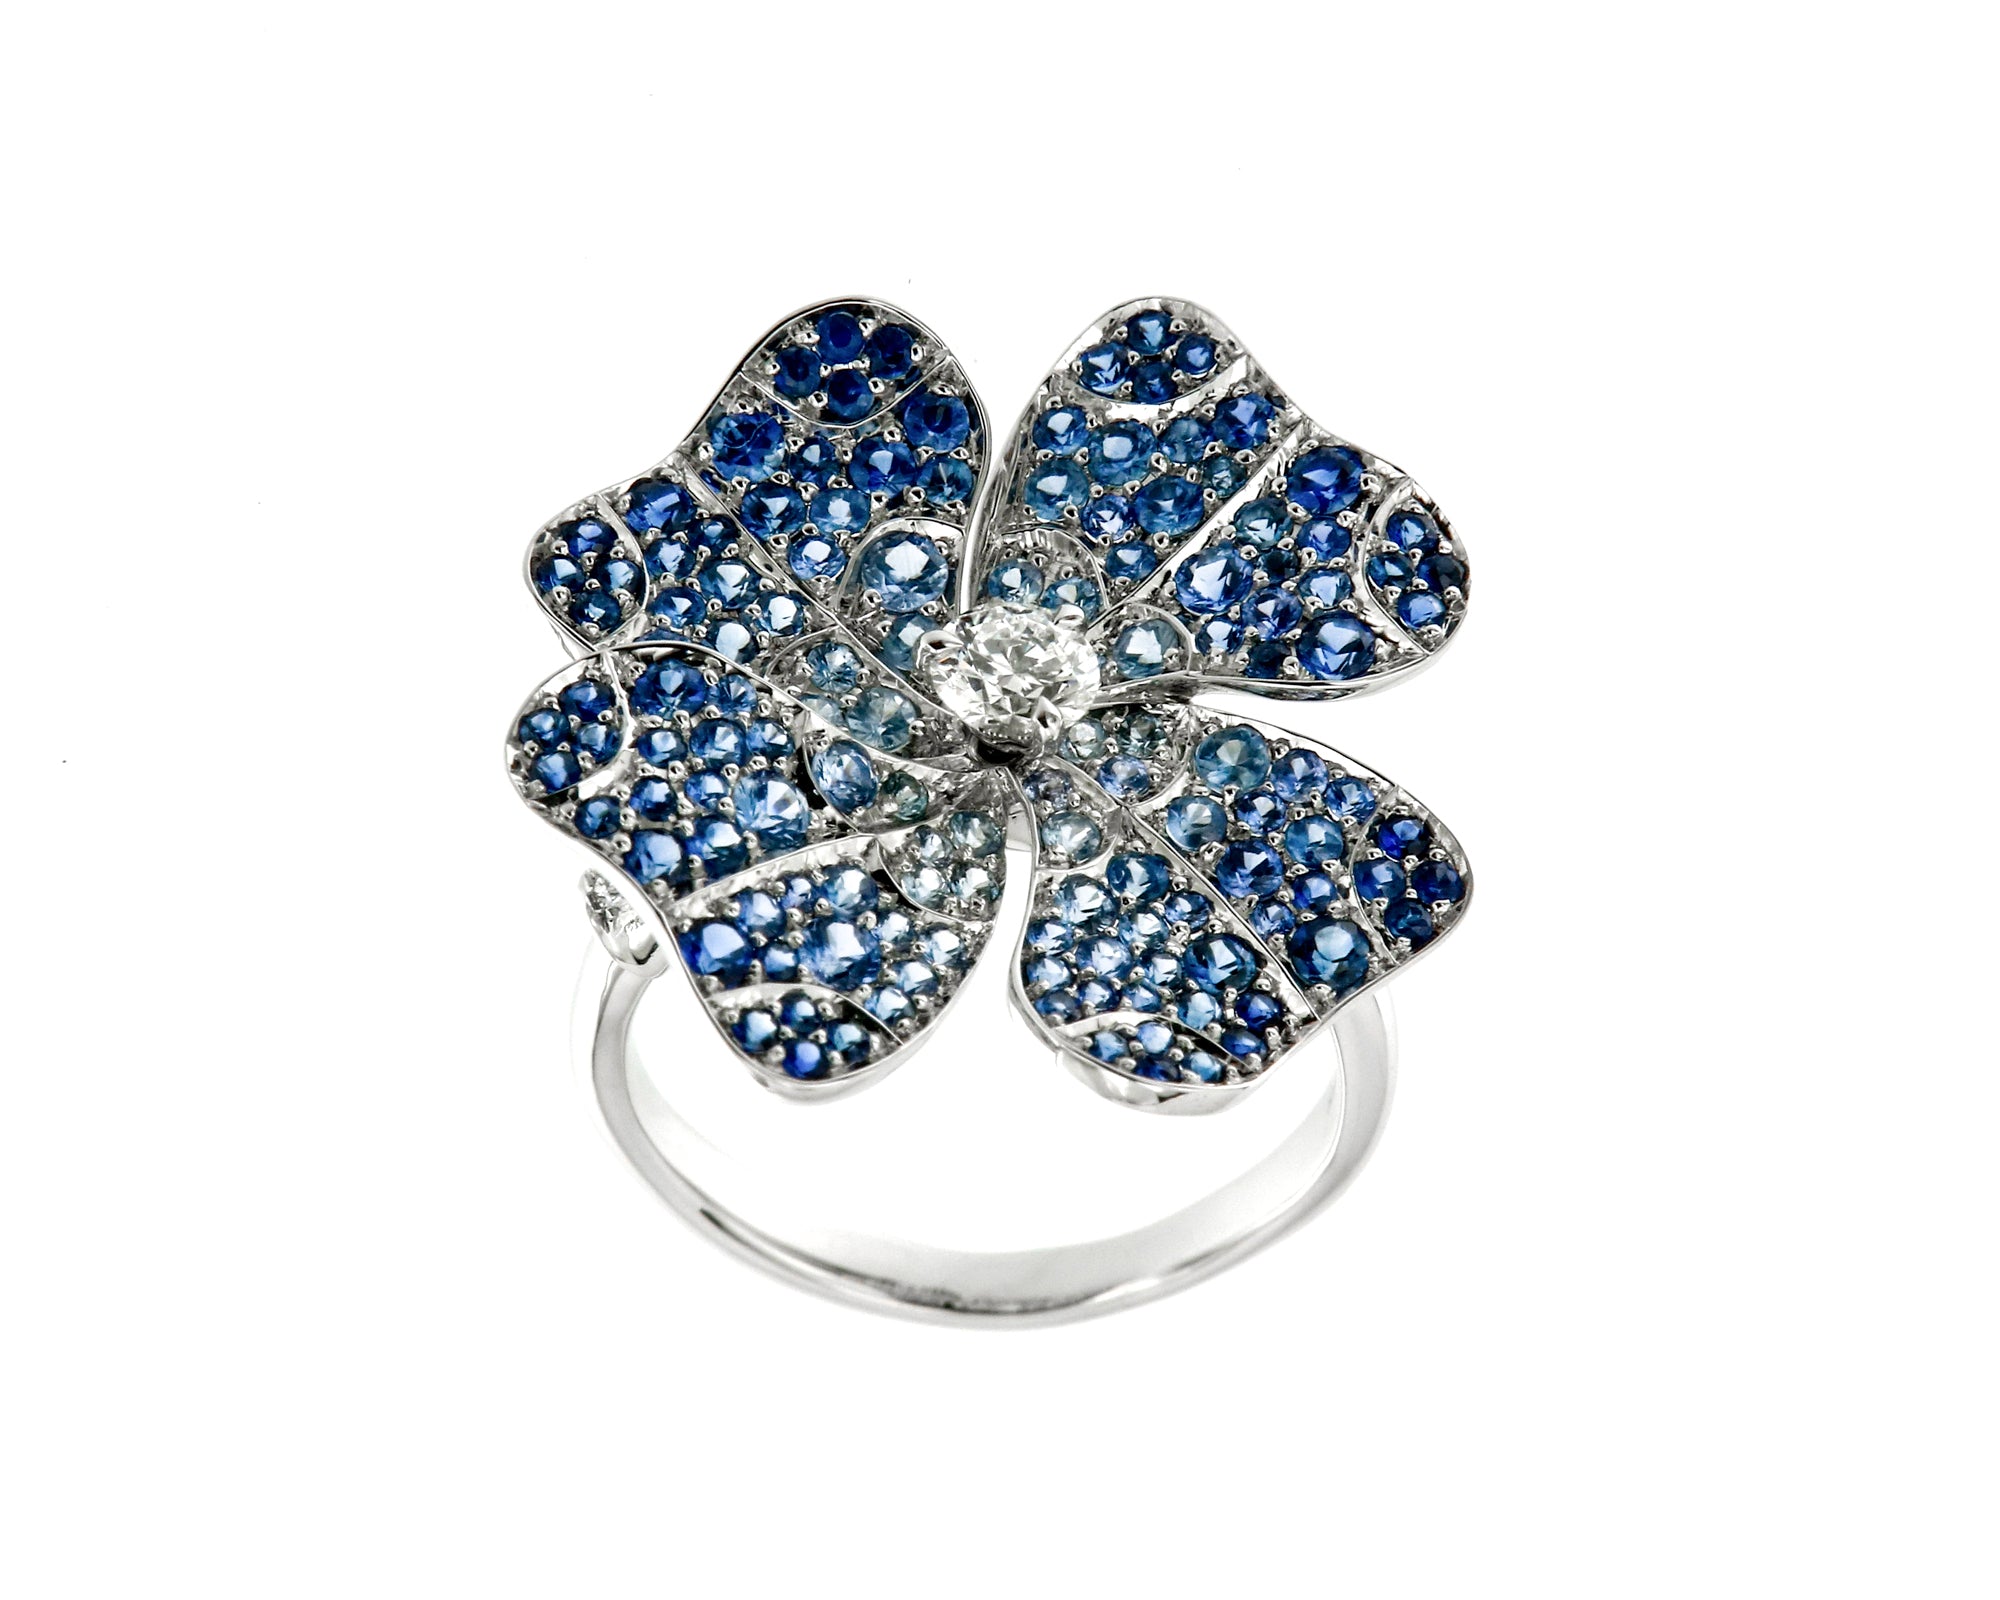 Ring White Gold with Blue Sapphires and White Diamonds